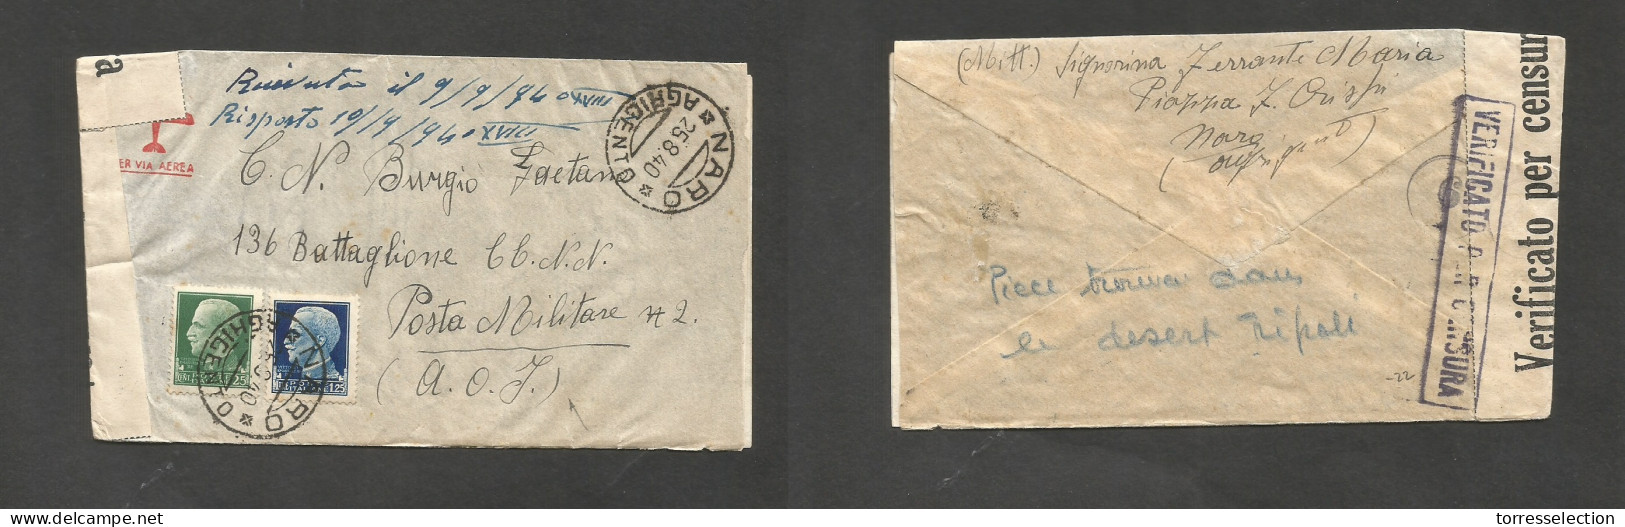 Italy - XX. 1940 (25 Aug) Naro - Africa Oriental Italiana. Air Multifkd Censored Envelope, Censored With Contains. SALE. - Zonder Classificatie